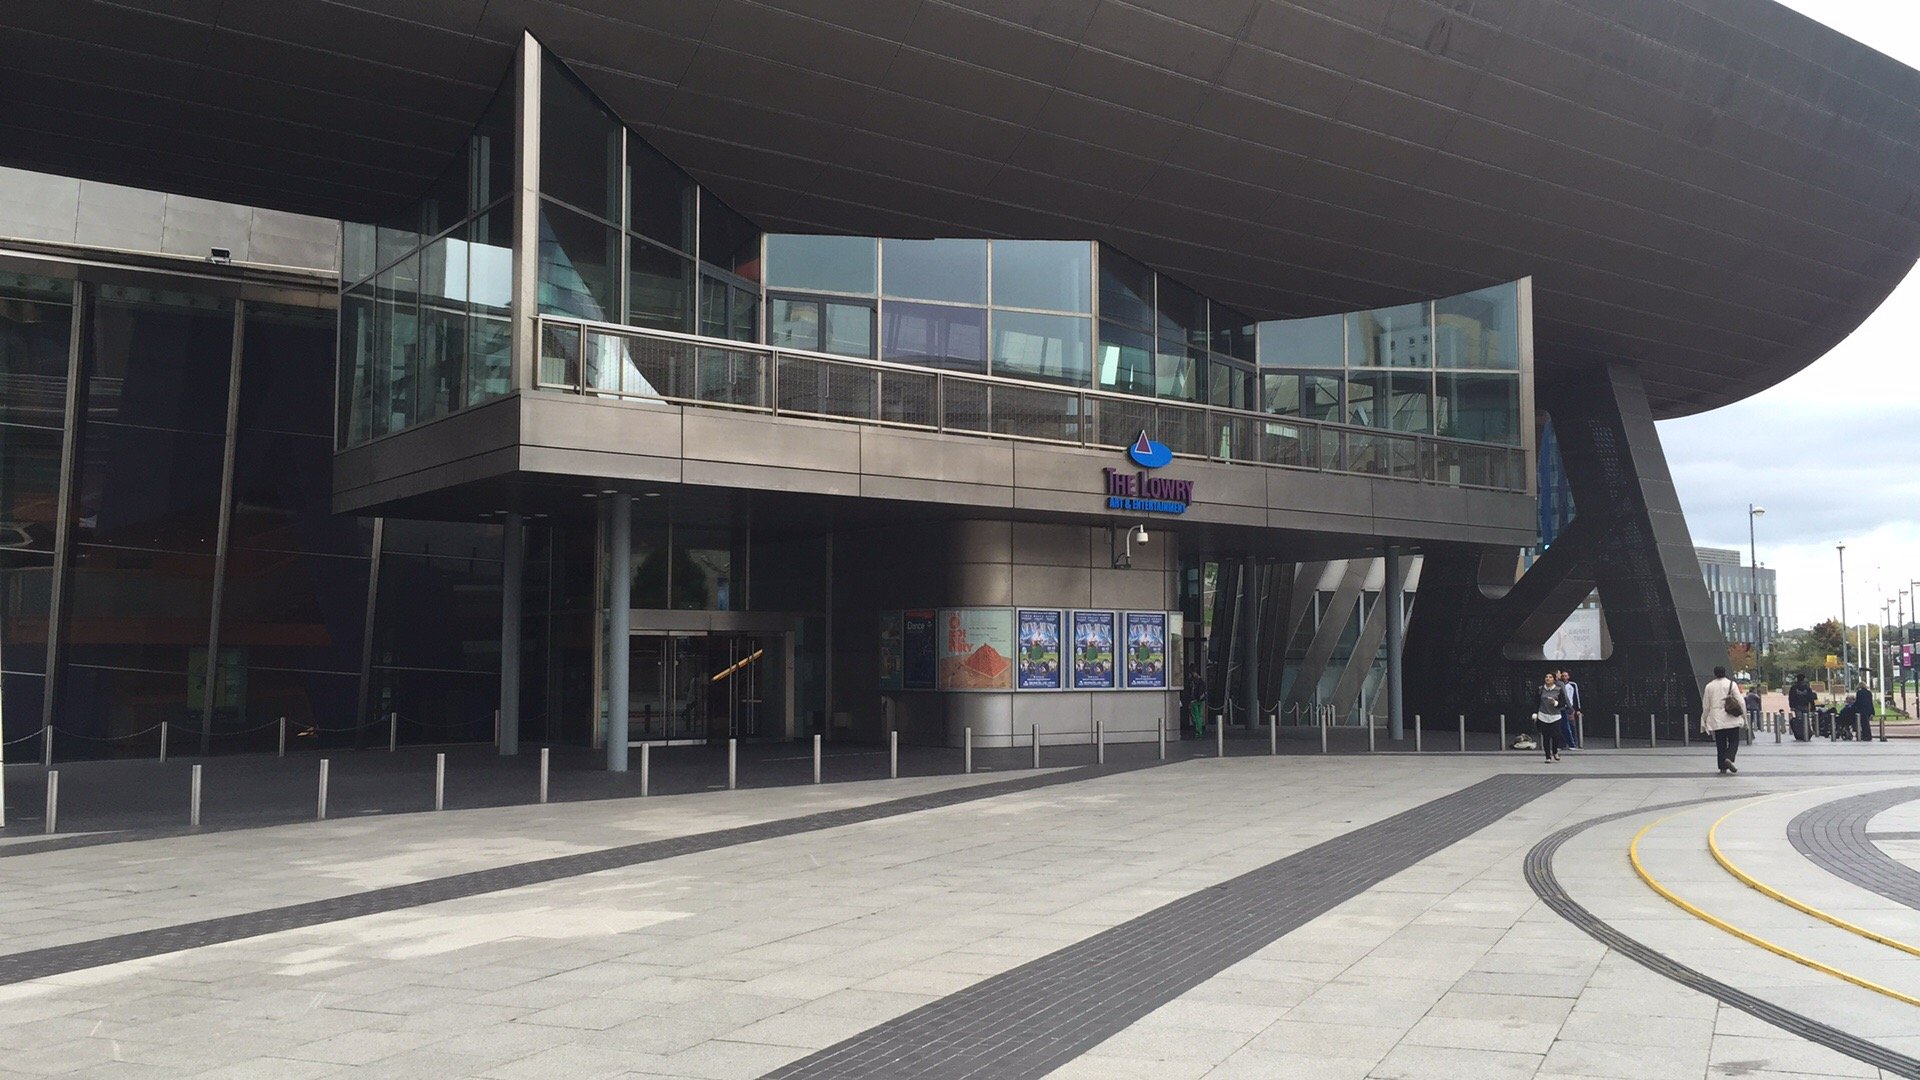 Lowry Theater Salford Quays